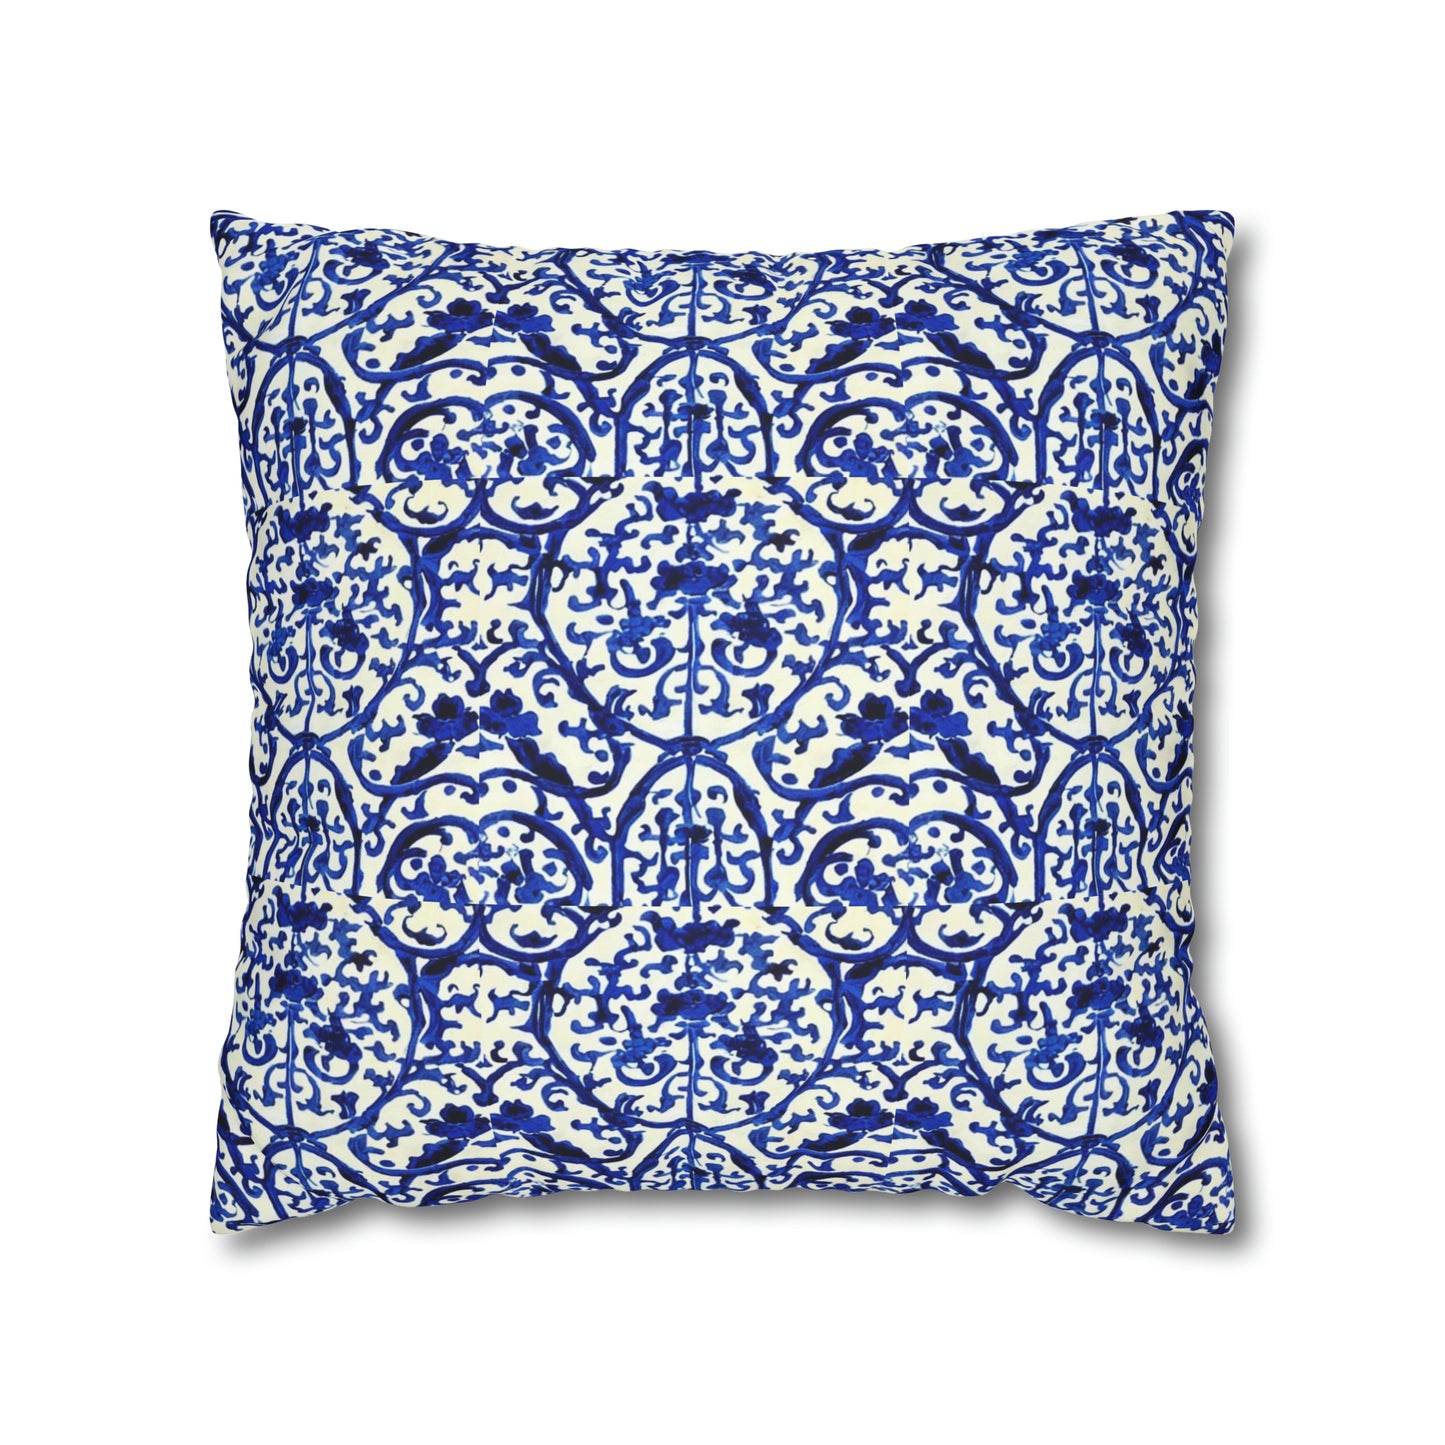 Portuguese Blue and White Tile Pattern Decorative Spun Polyester Pillow Cover